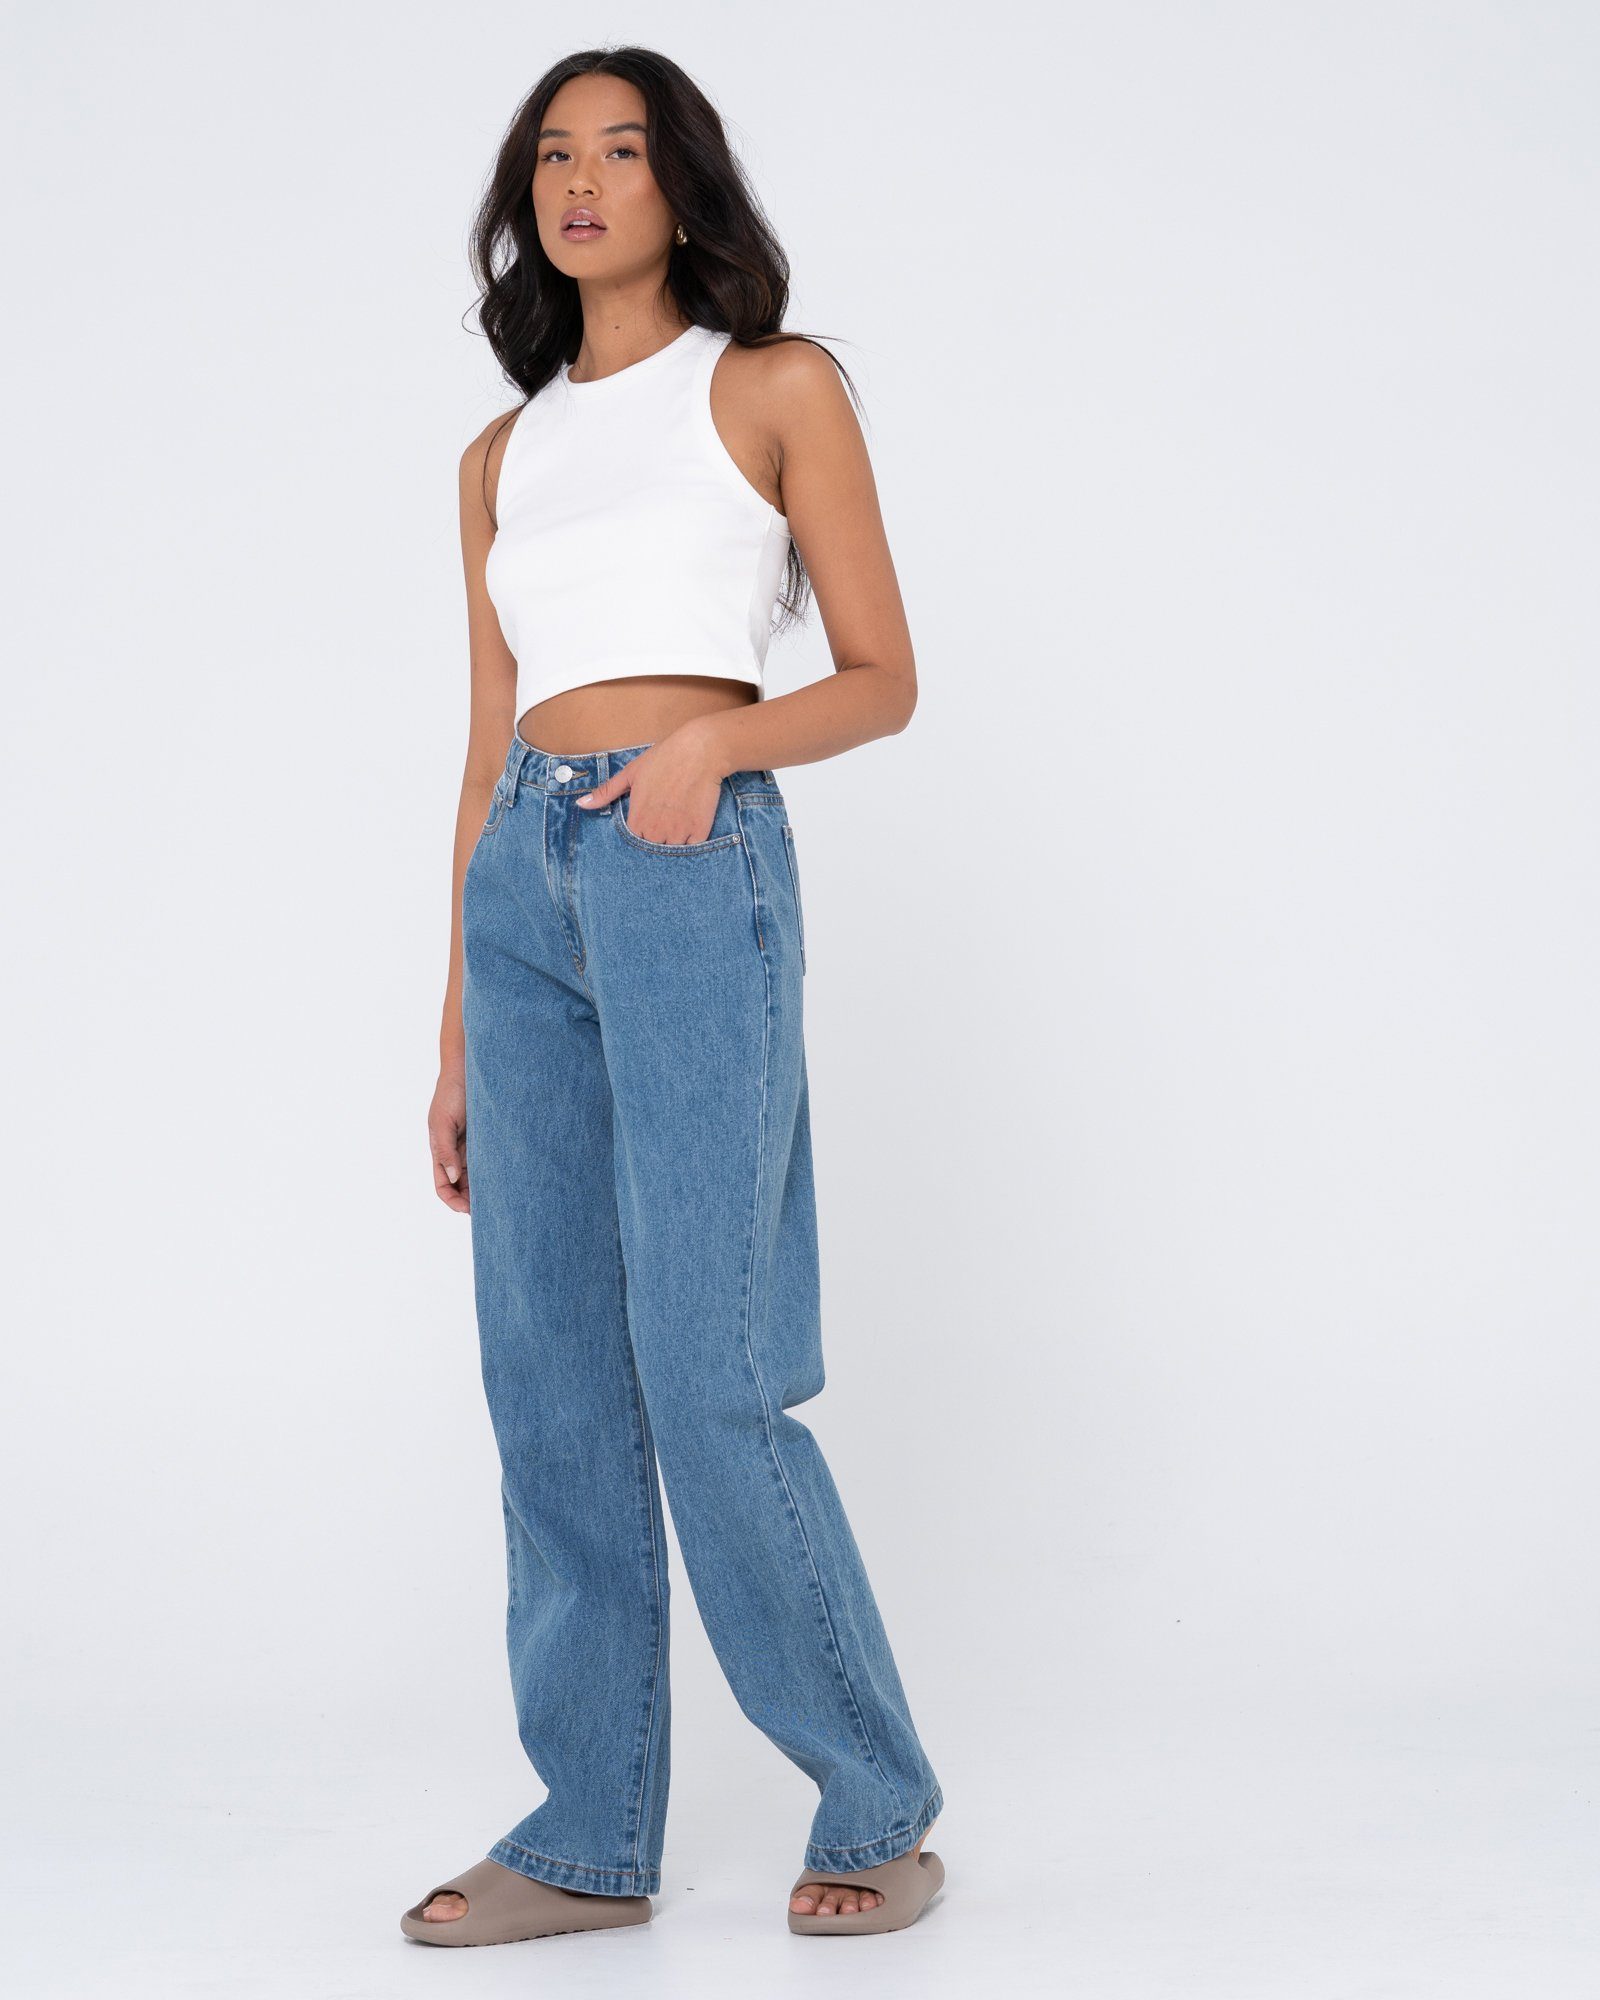 Rusty Weite Jeans - JEAN HIGH BAGGY Sea Blue